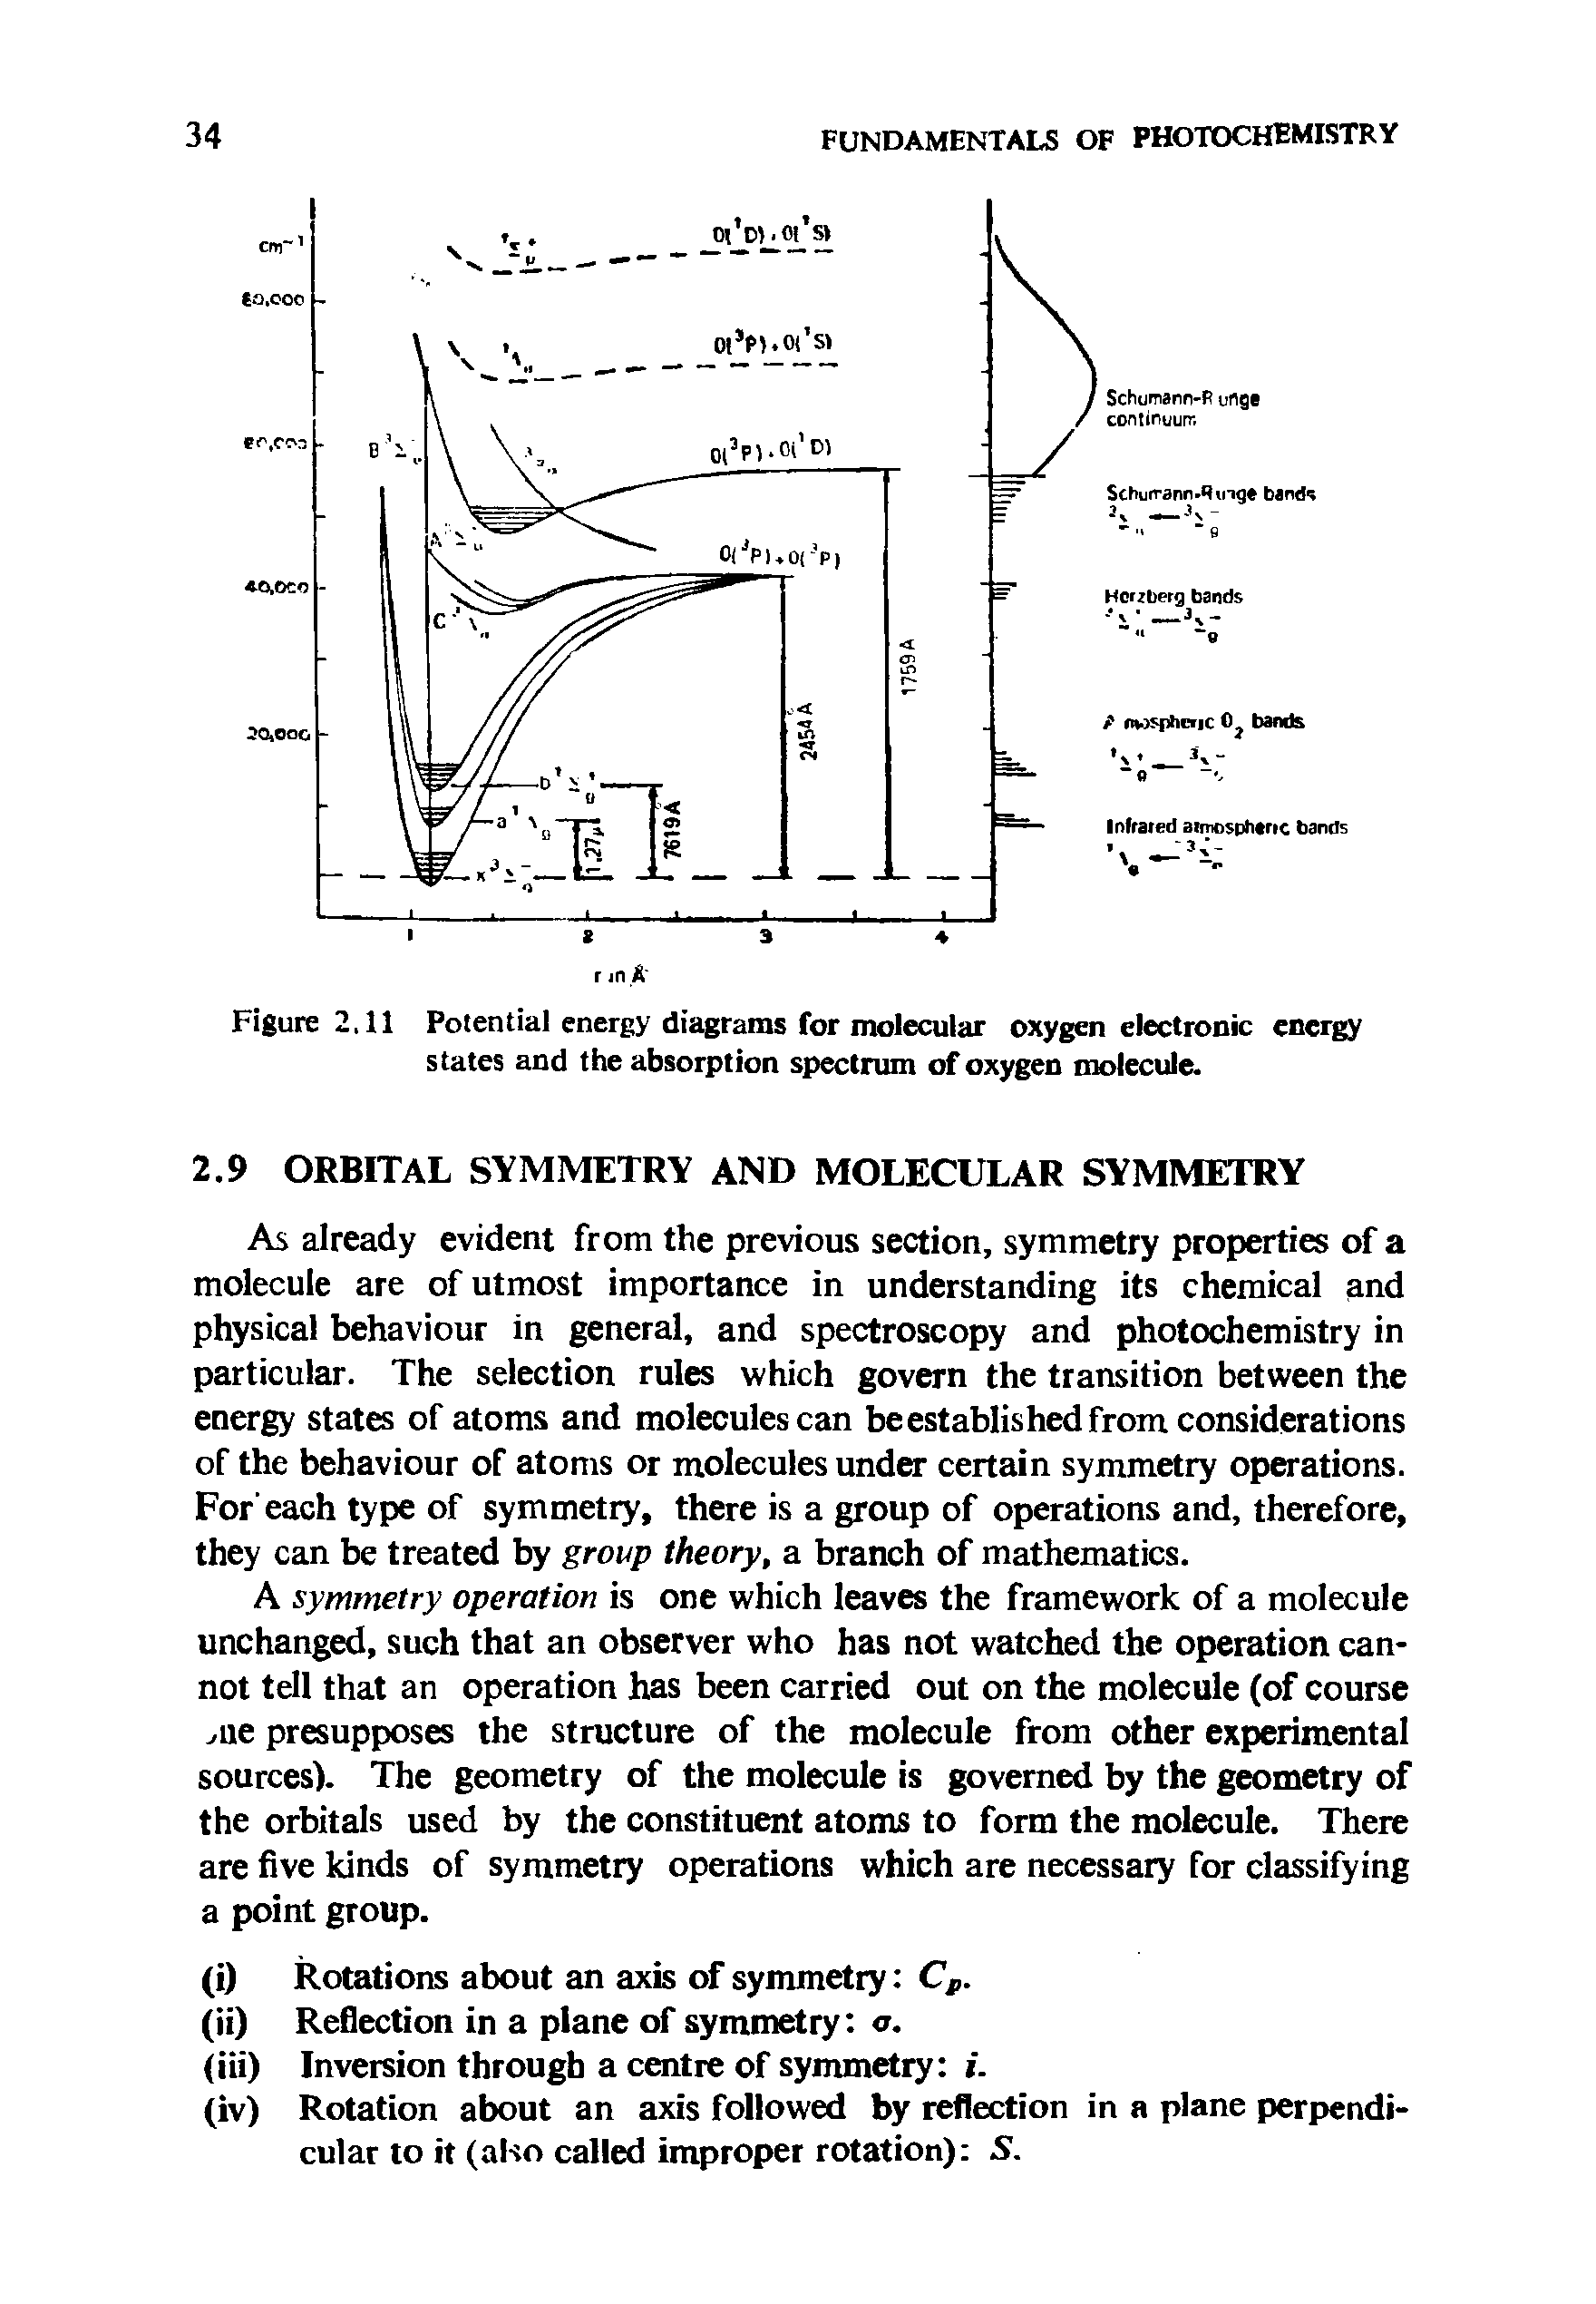 Figure 2.11 Potential energy diagrams for molecular oxygen electronic energy states and the absorption spectrum of oxygen molecule.